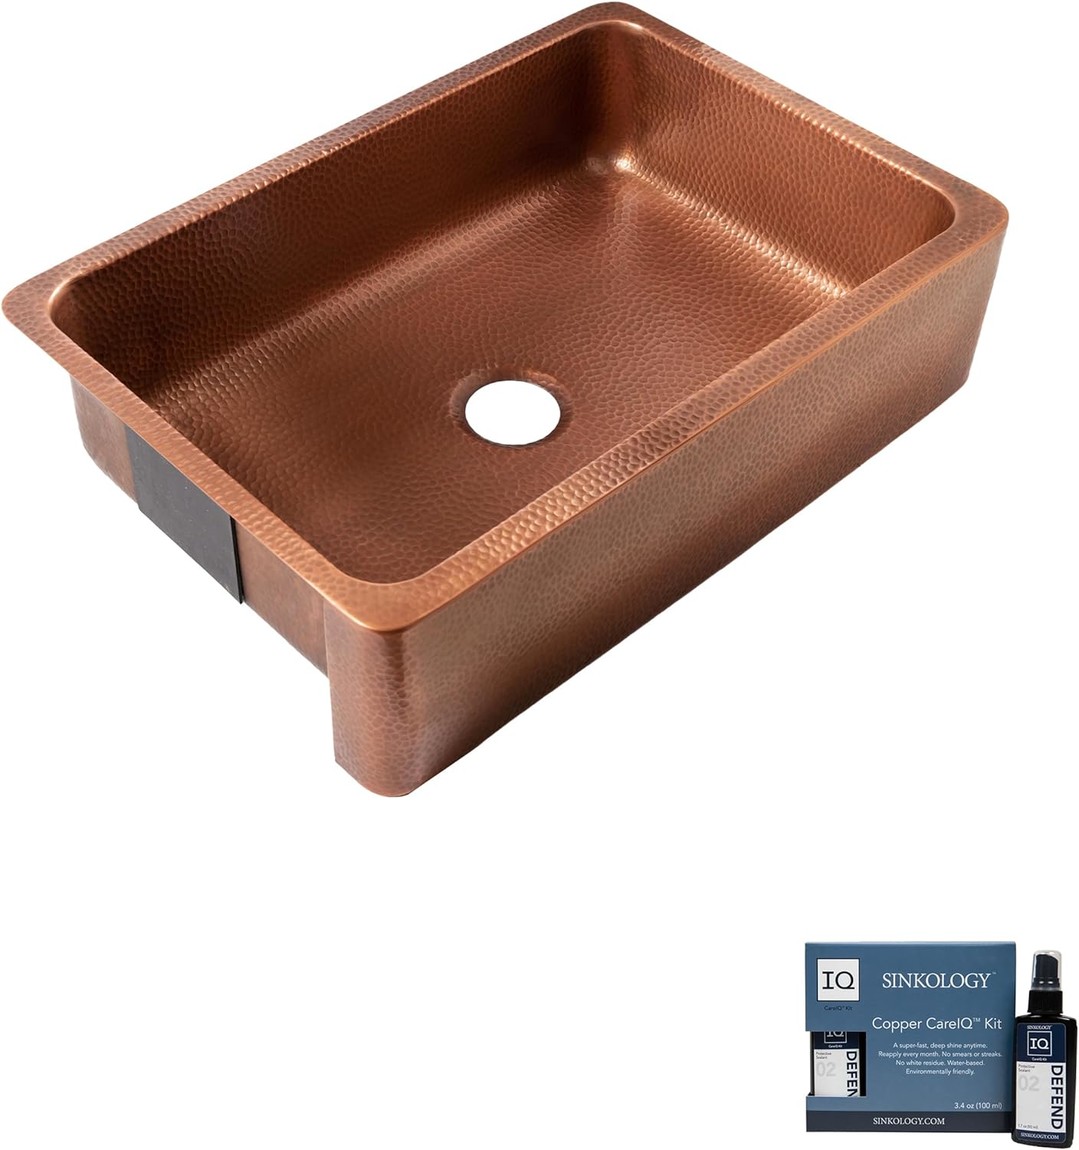 is a copper sink a good idea 2